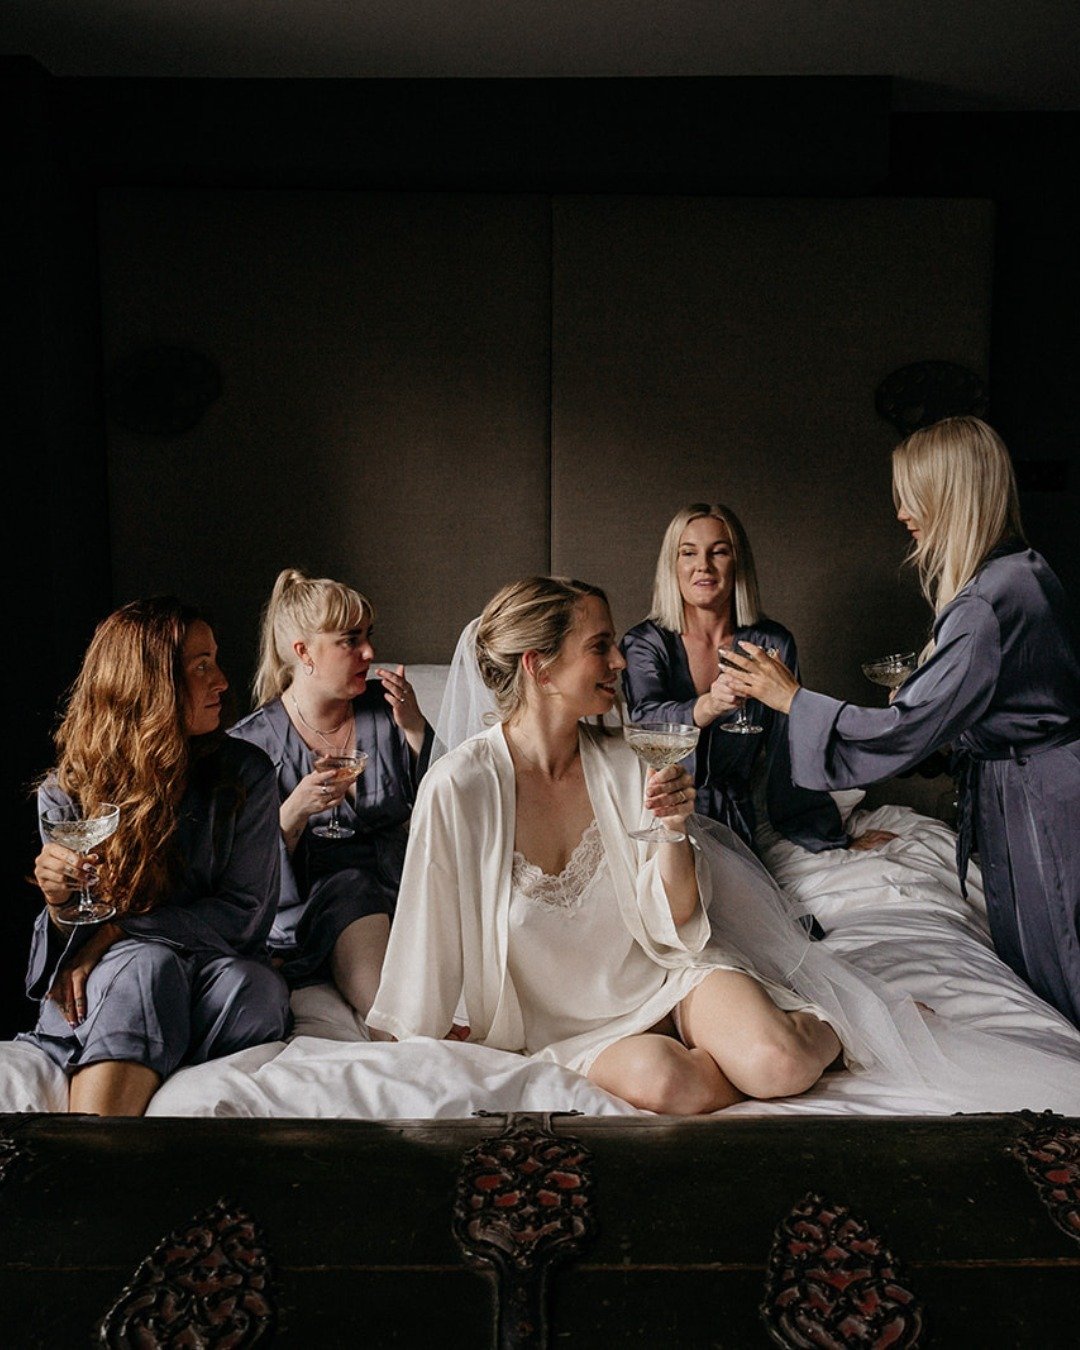 This Swedish bride went hardcore mode for her getting ready morning: an artsy room in Amsterdam boutique hotel @hotelthecraftsmen, a bride squad in matching photogenic robes, and a bit of champagne to get in the mood. Does it get any more photogenic?